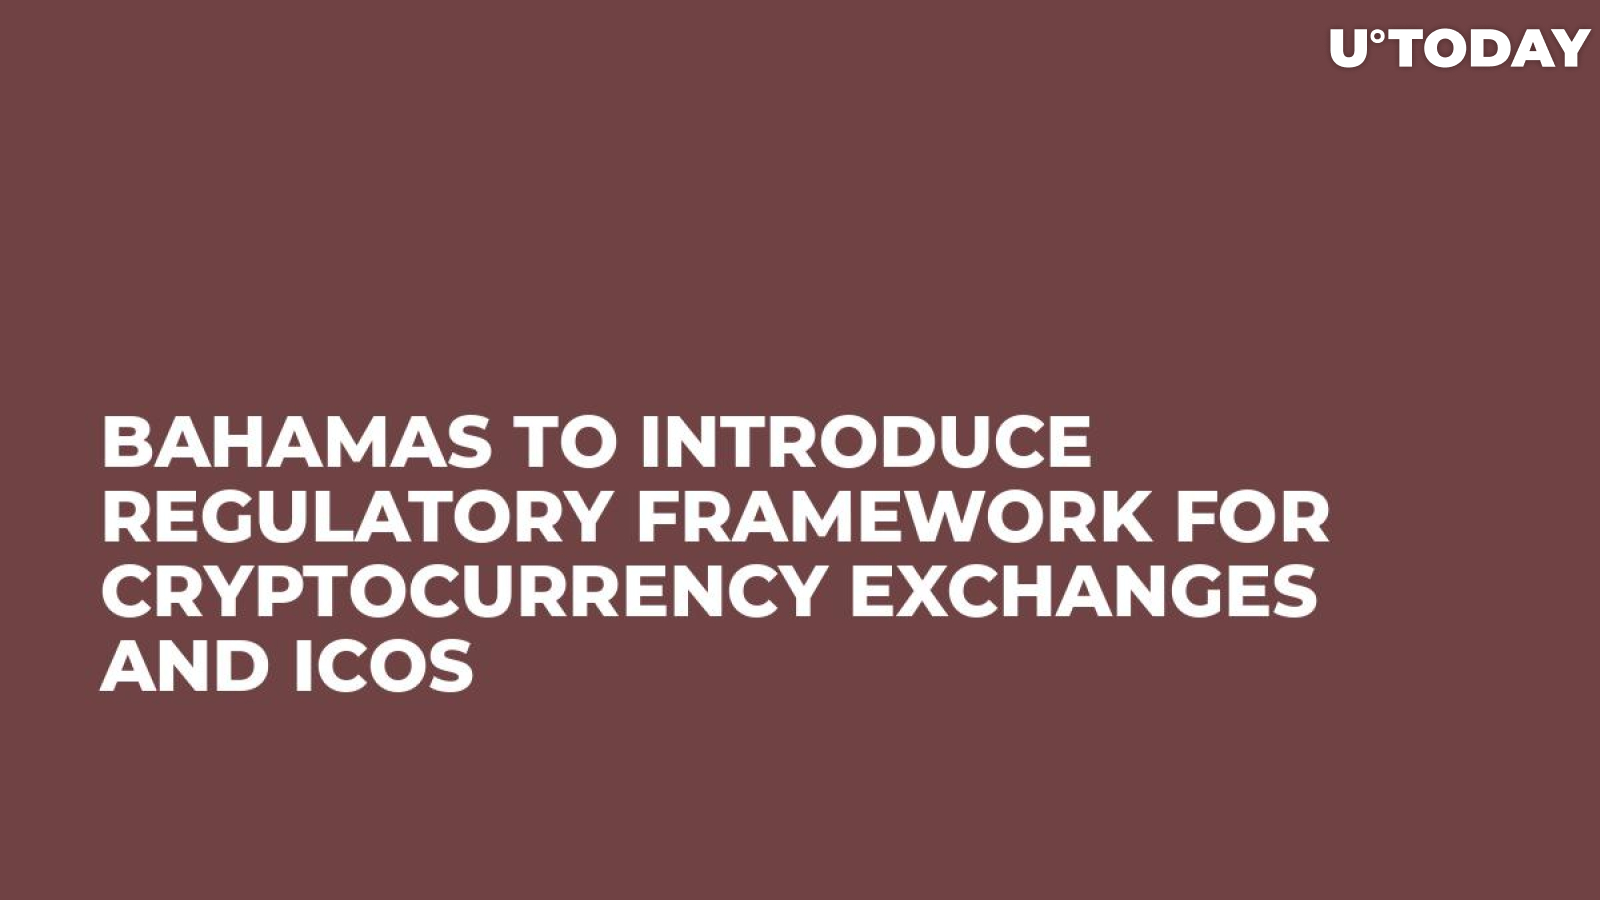 Bahamas to Introduce Regulatory Framework For Cryptocurrency Exchanges and ICOs